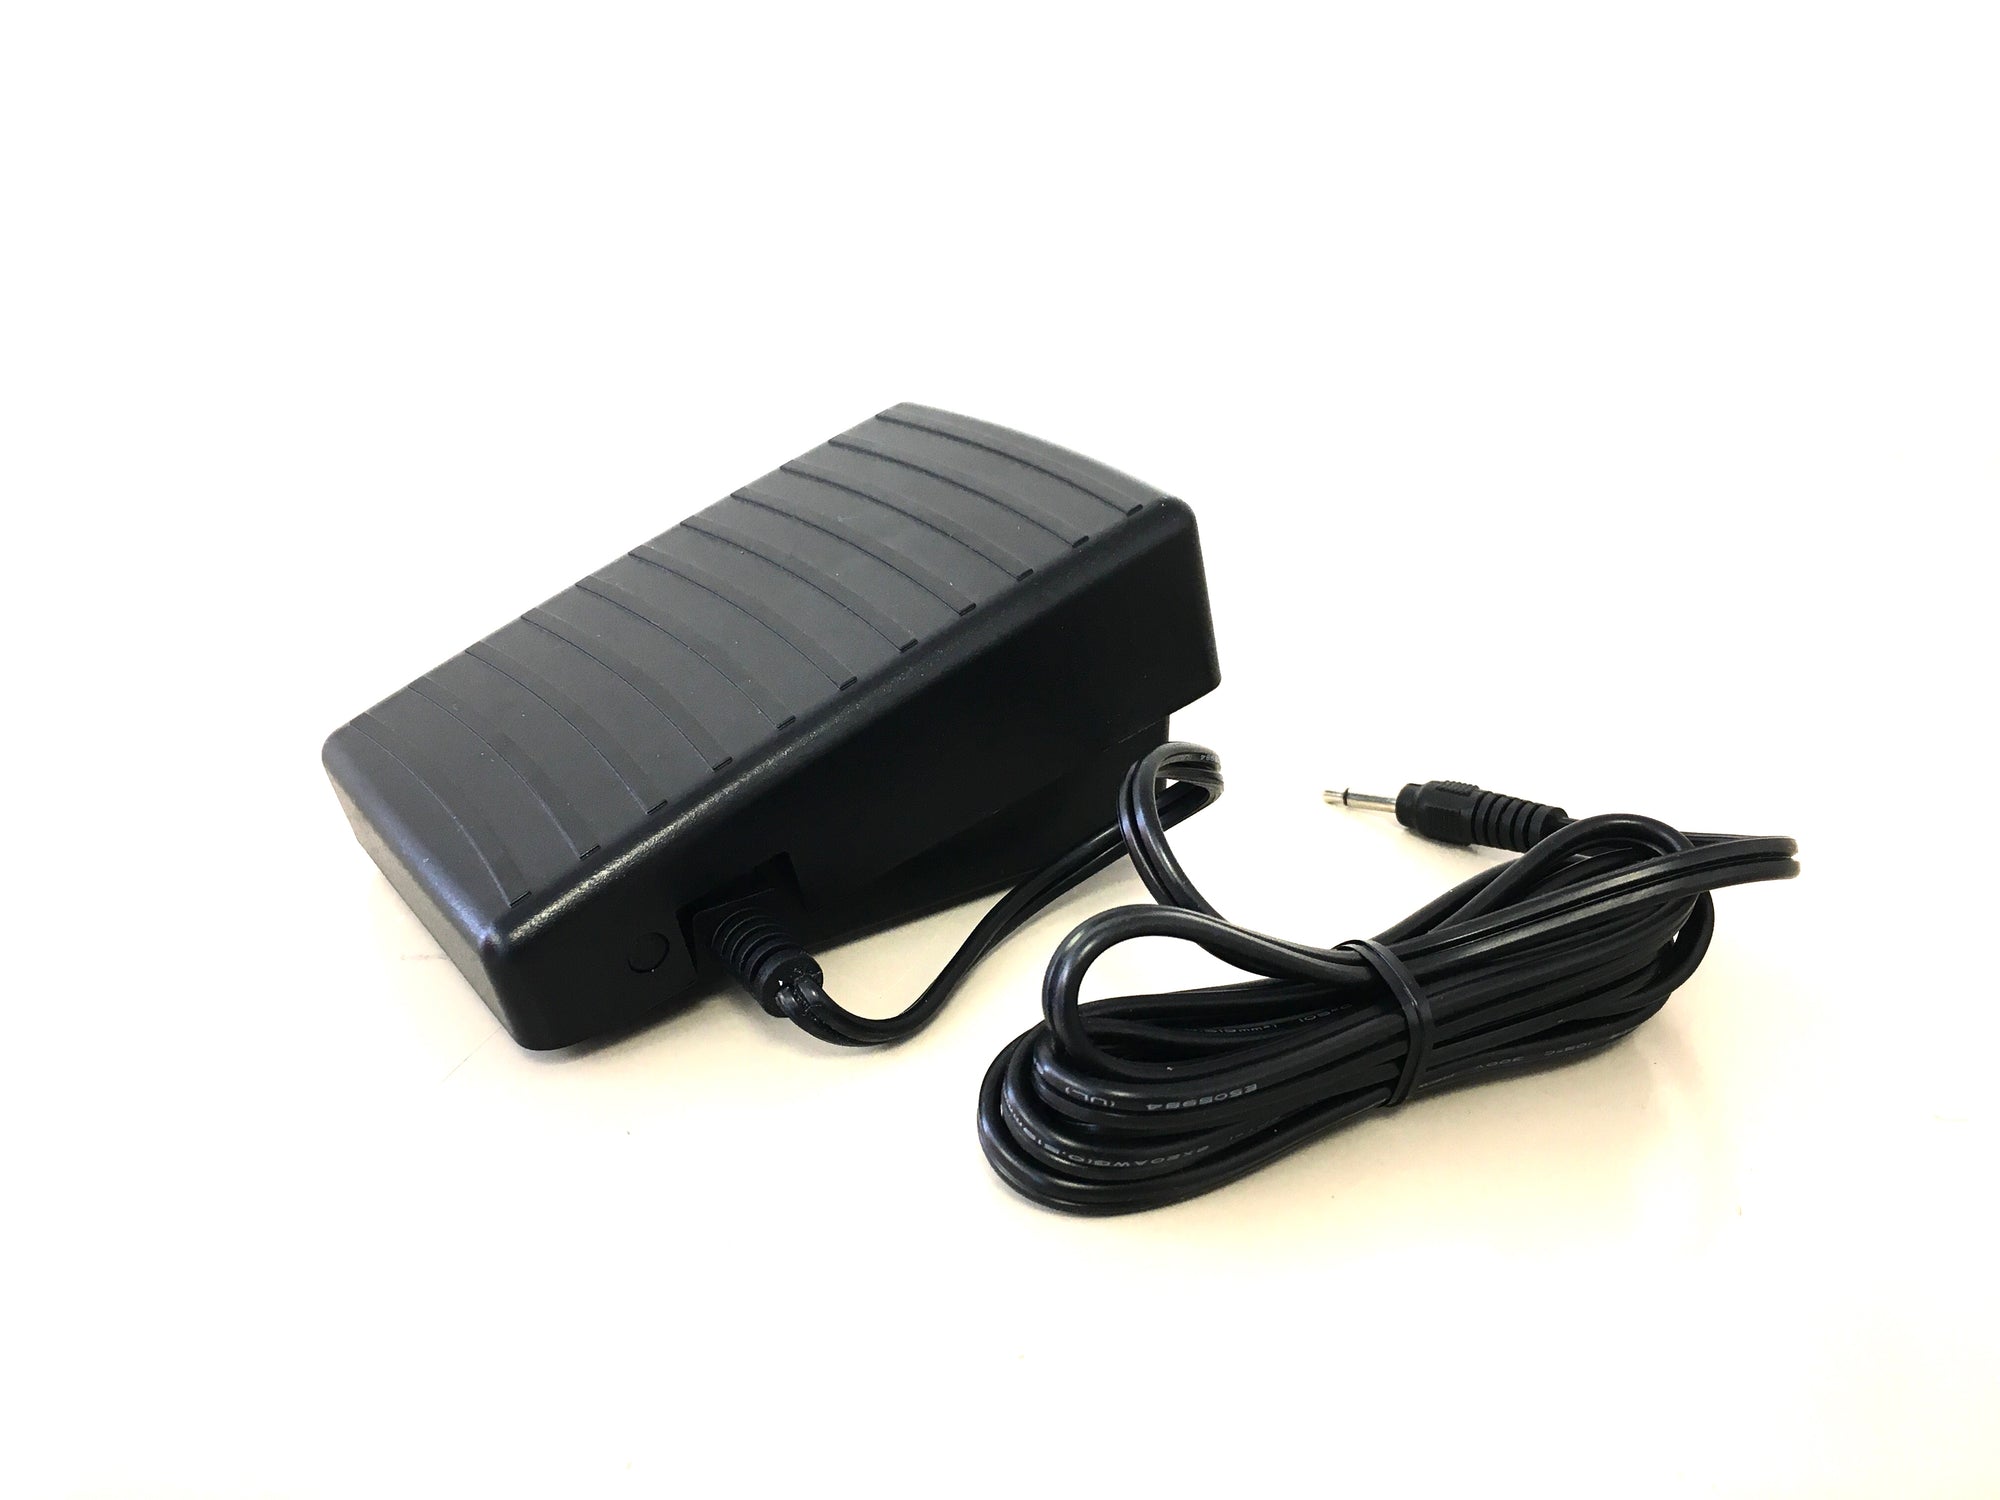 Foot pedal for SS-700+ Sewing Machine